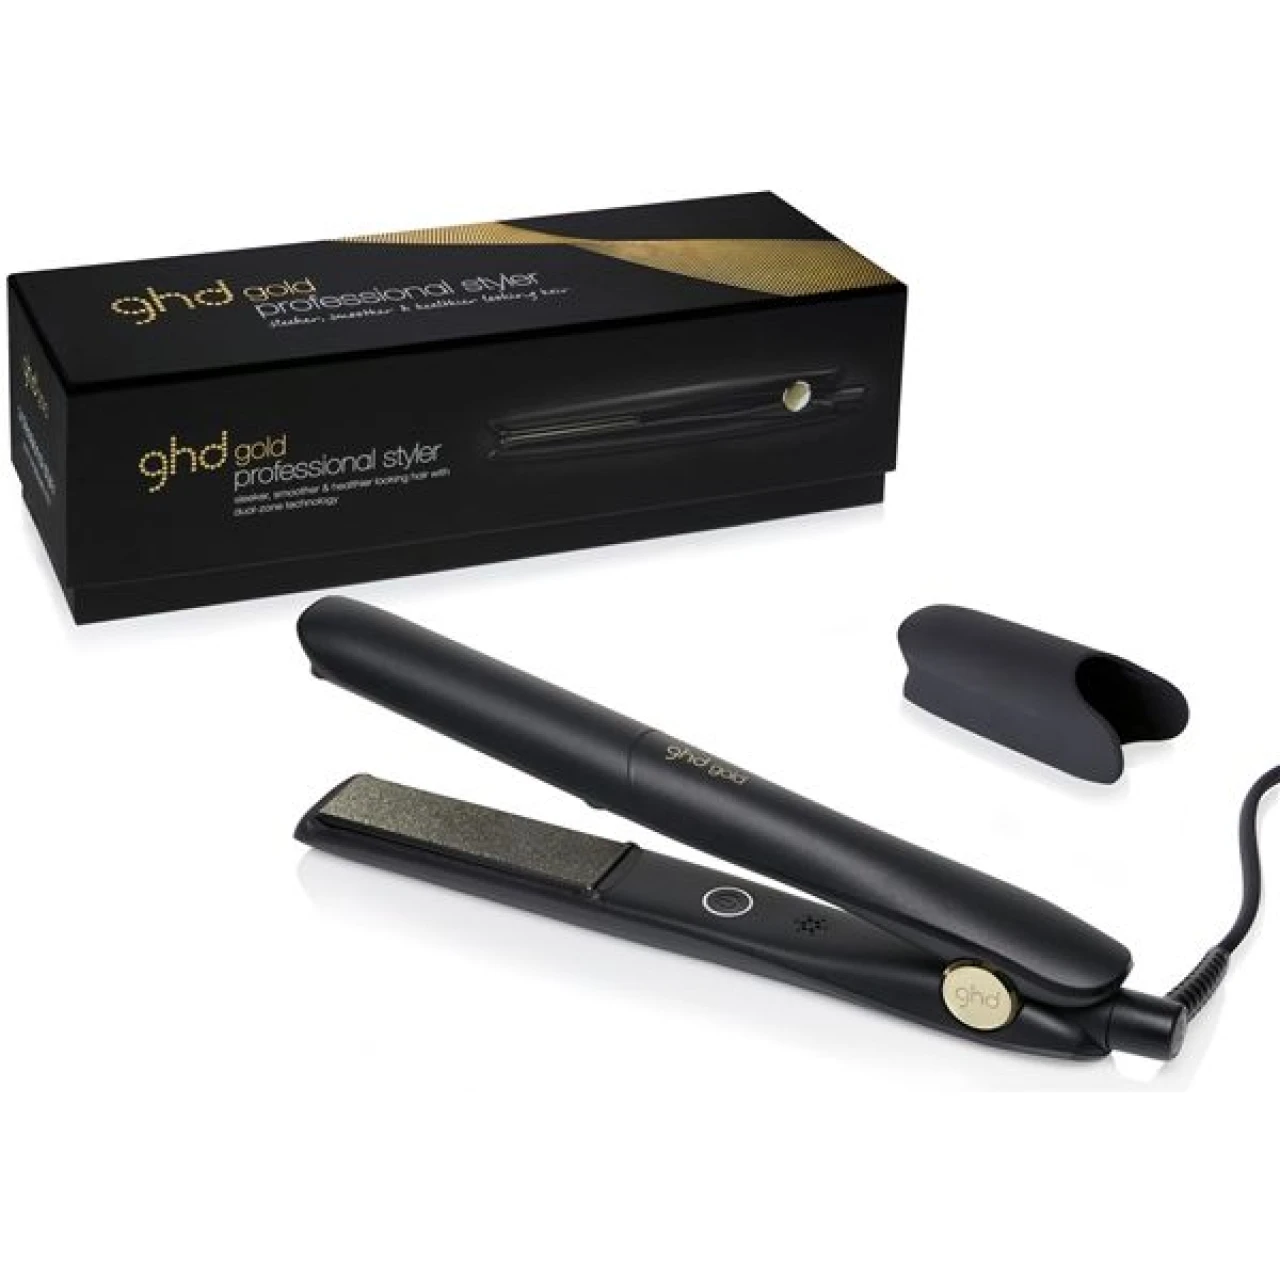 GHD Gold New Styler